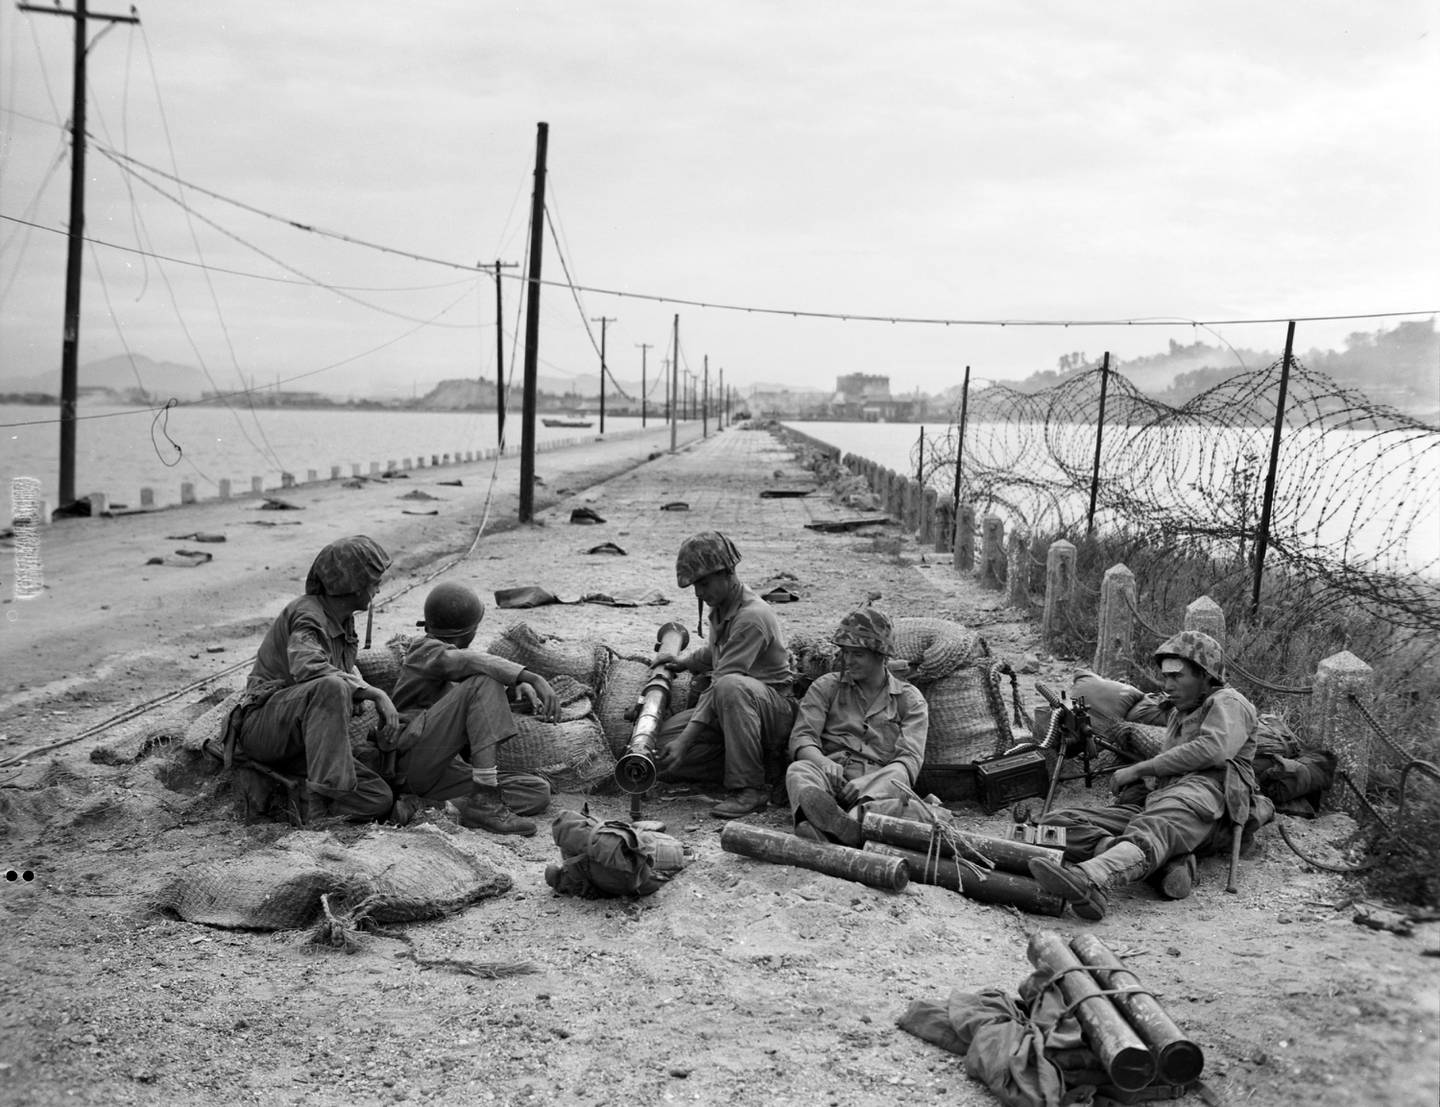 Marines with bazookas on post during the Korean War. (National Archives)